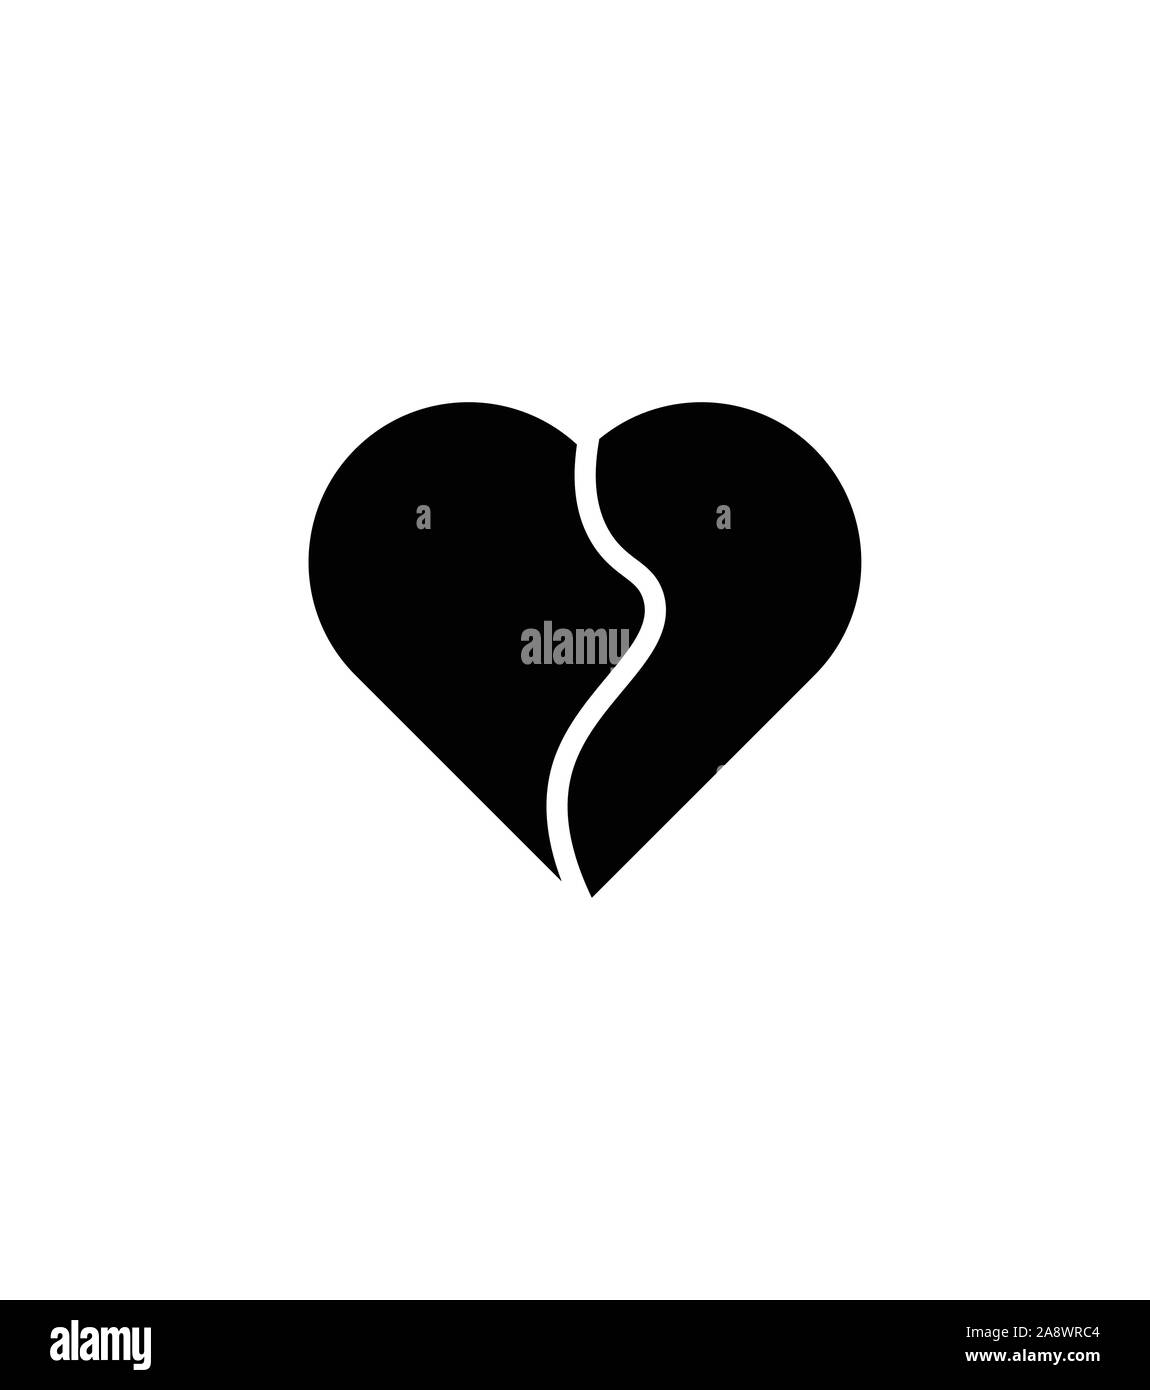 Black Heart Images  Free Photos, PNG Stickers, Wallpapers